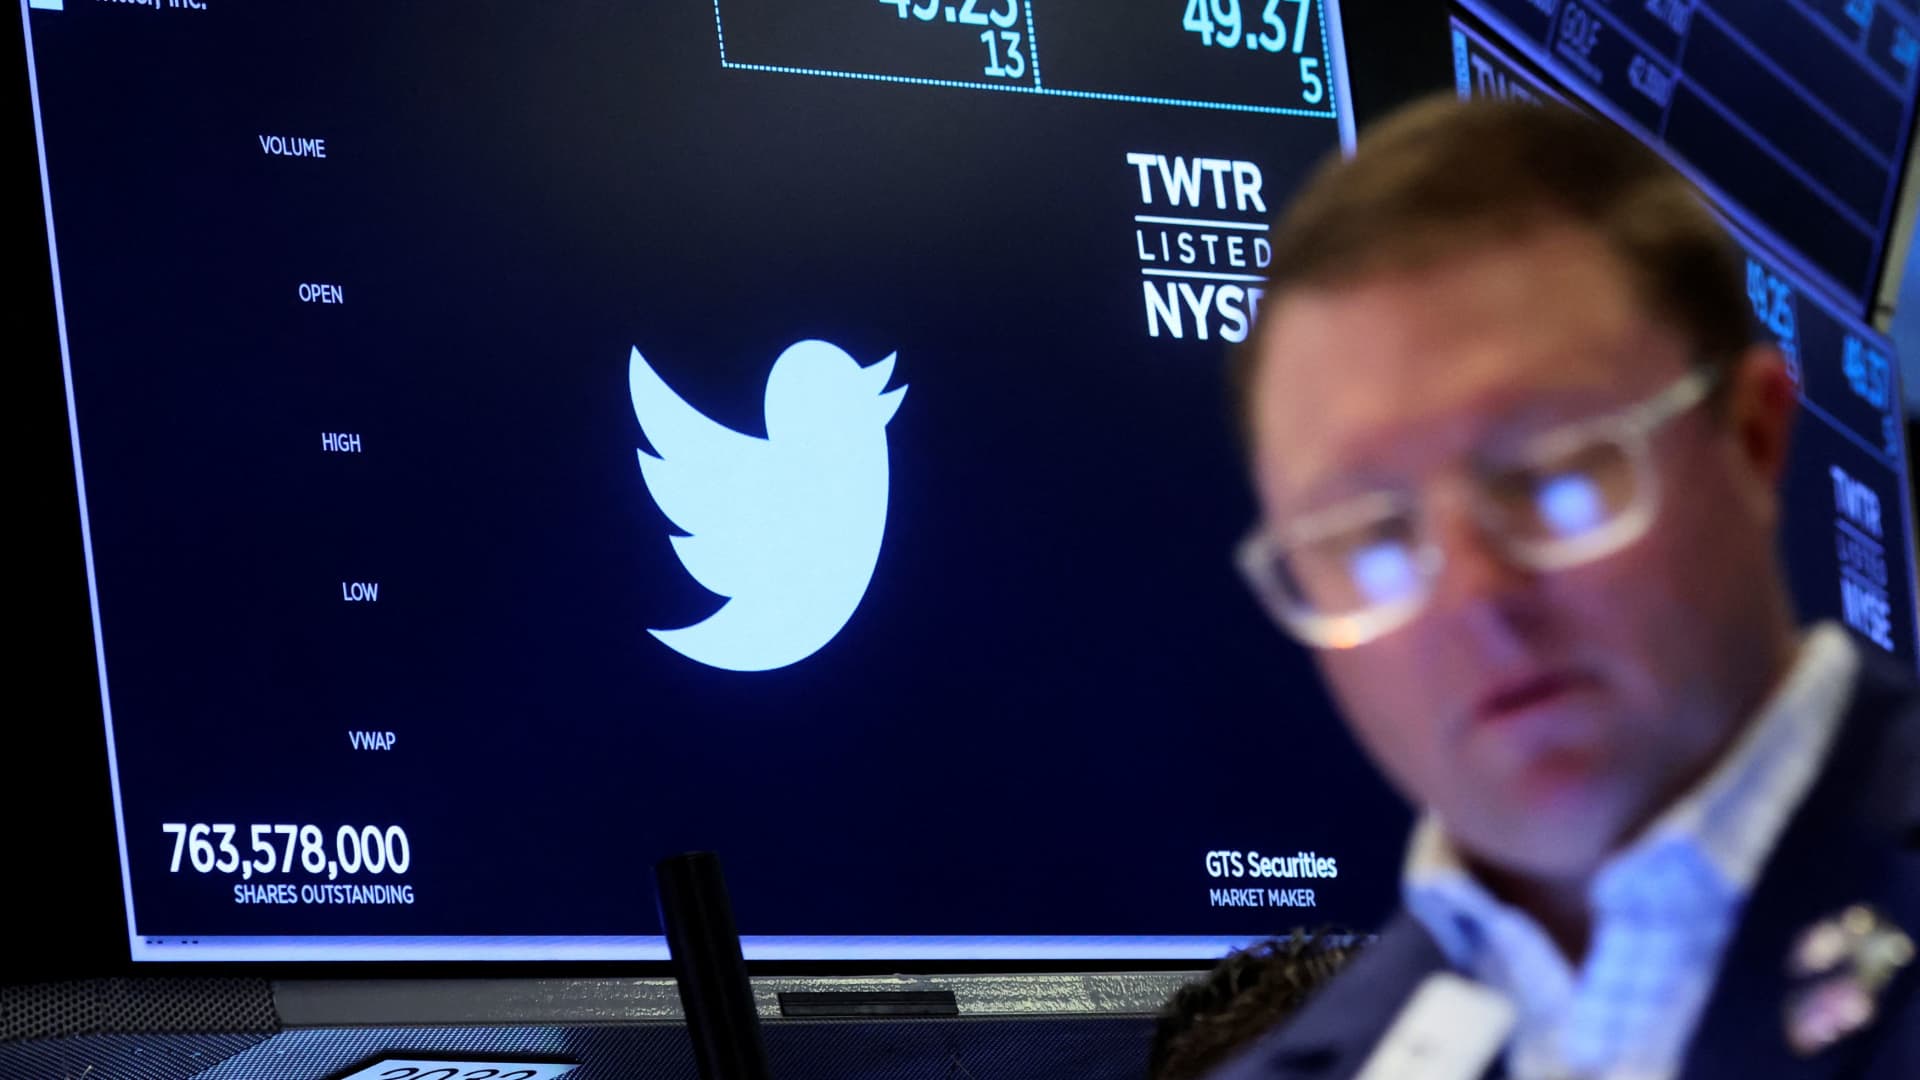 Twitter board urges shareholders to approve sale to Elon Musk